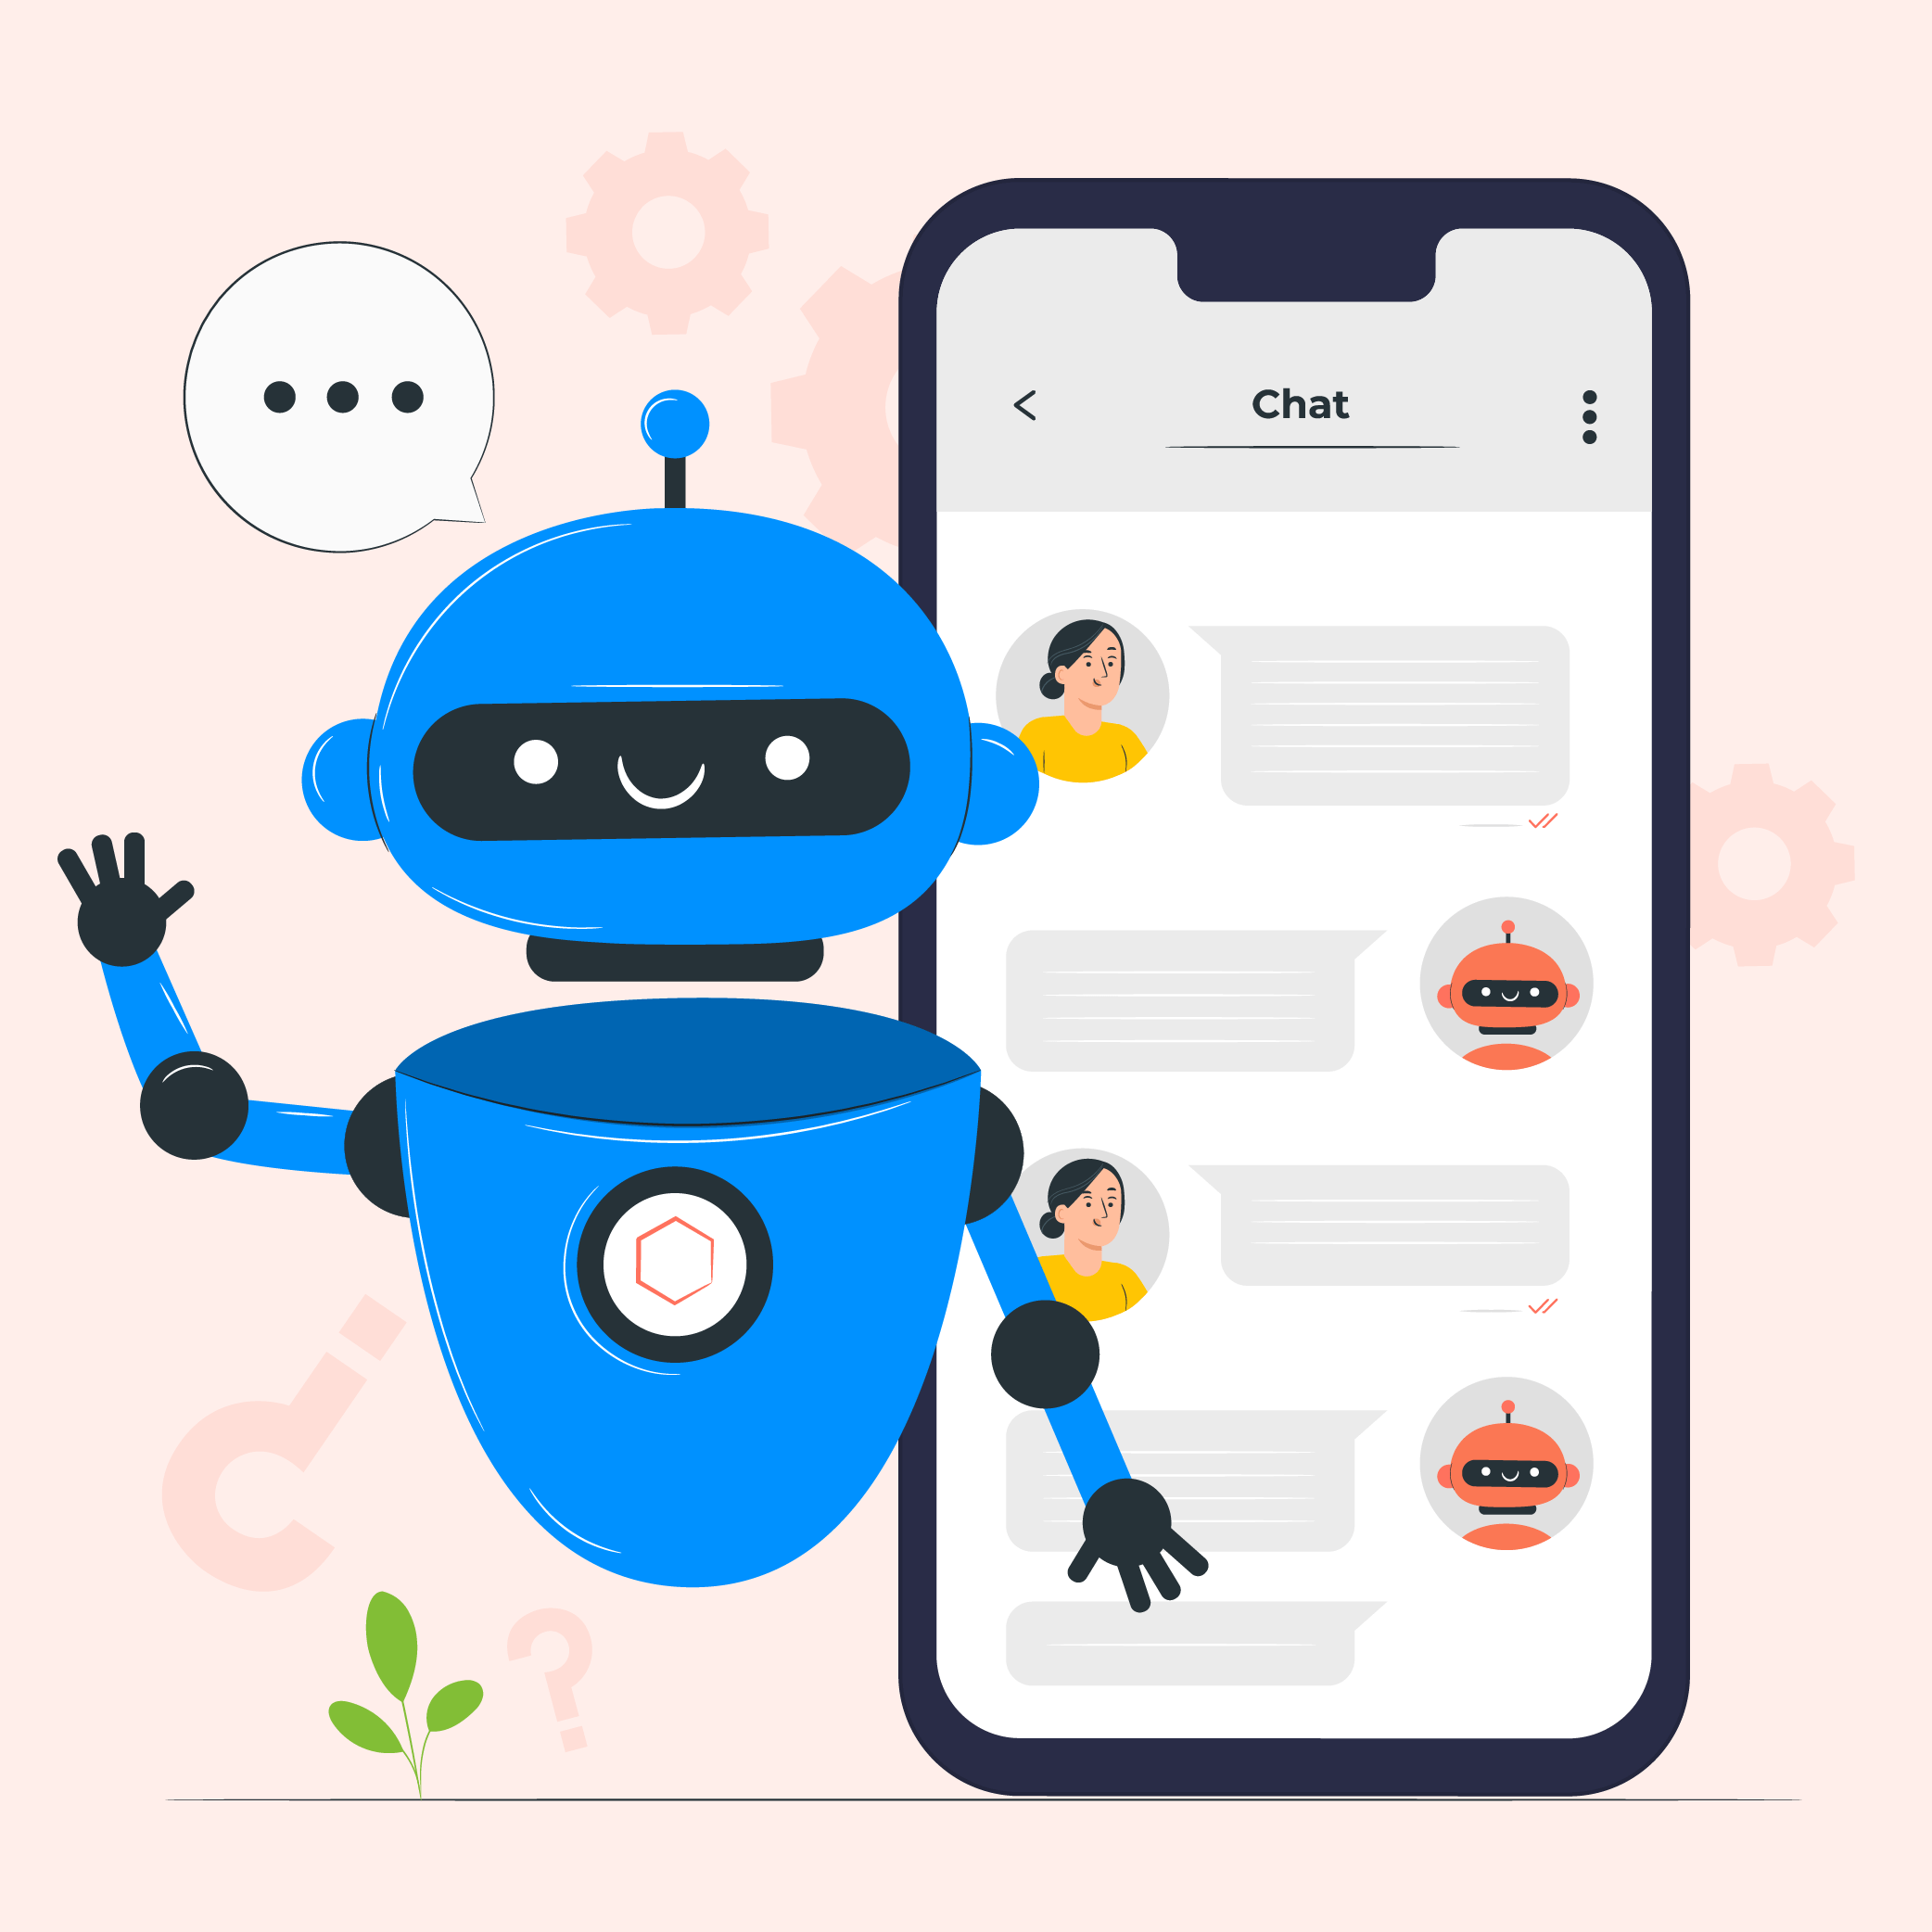 Building Intelligent Chatbots in PHP: Integrating Natural Language Processing